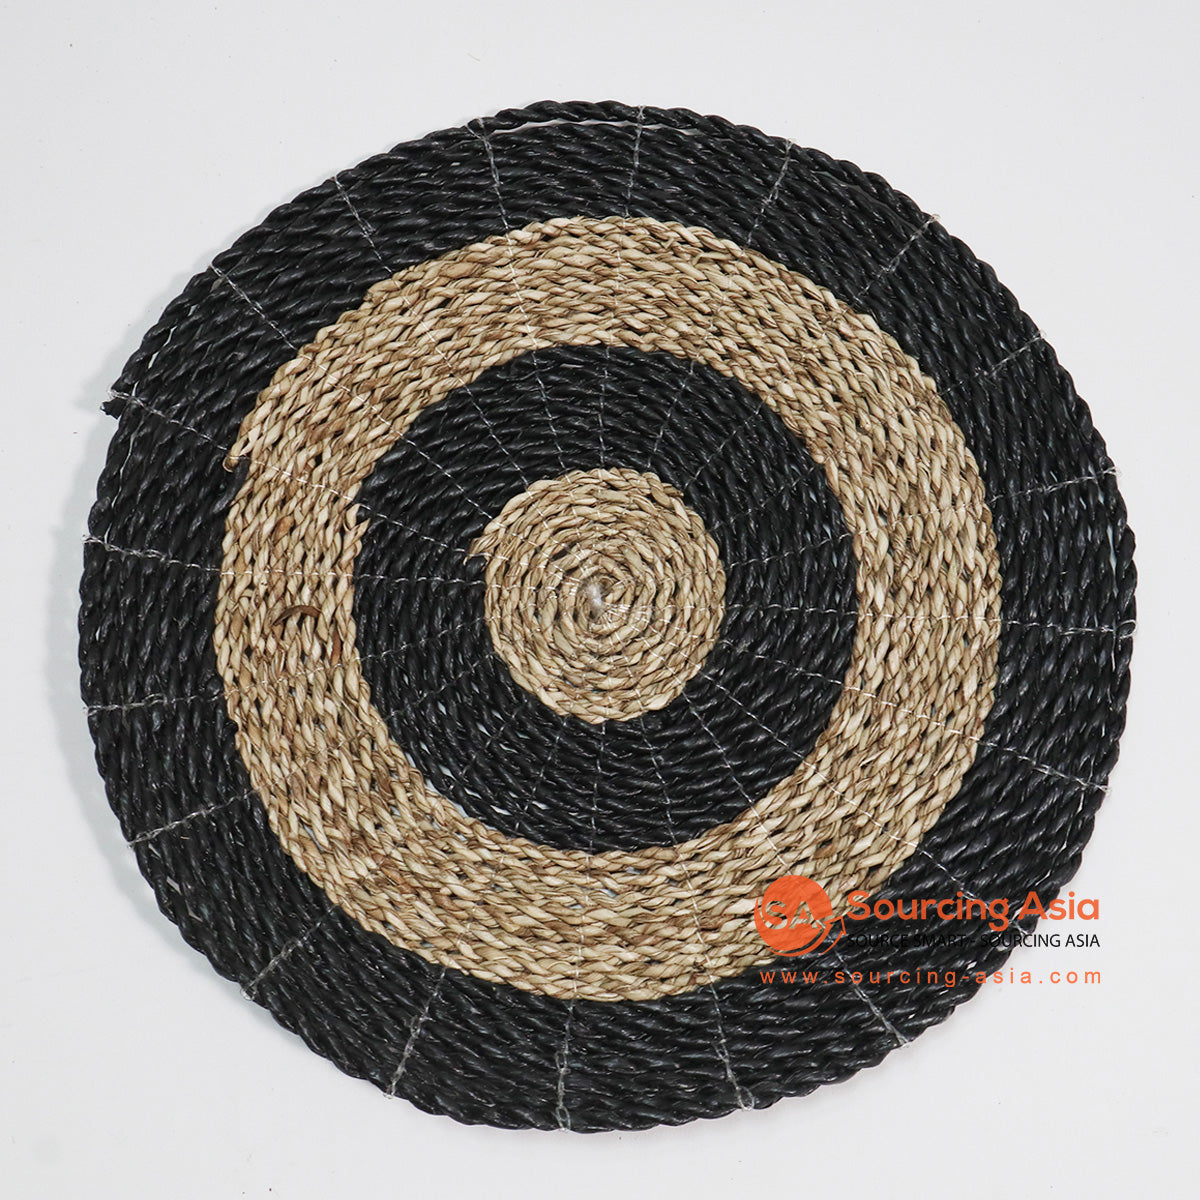 HBSC020-1 NATURAL WOVEN SEA GRASS AND BLACK PLASTIC ROUND DECORATIVE PLACEMAT